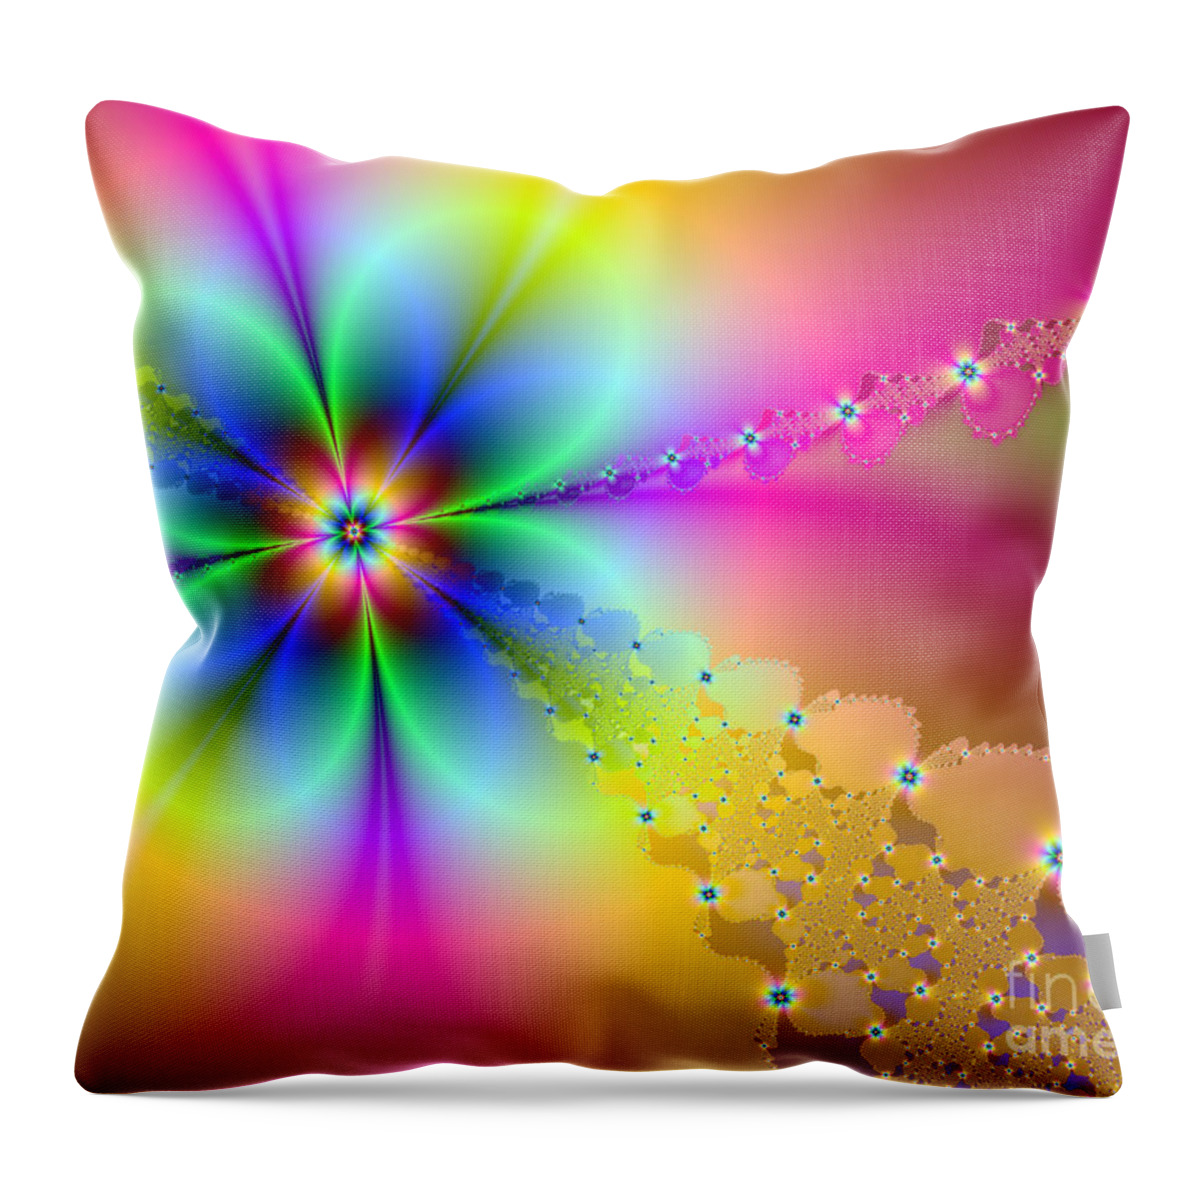 Artwork Throw Pillow featuring the digital art Flower Power by Dianne Phelps